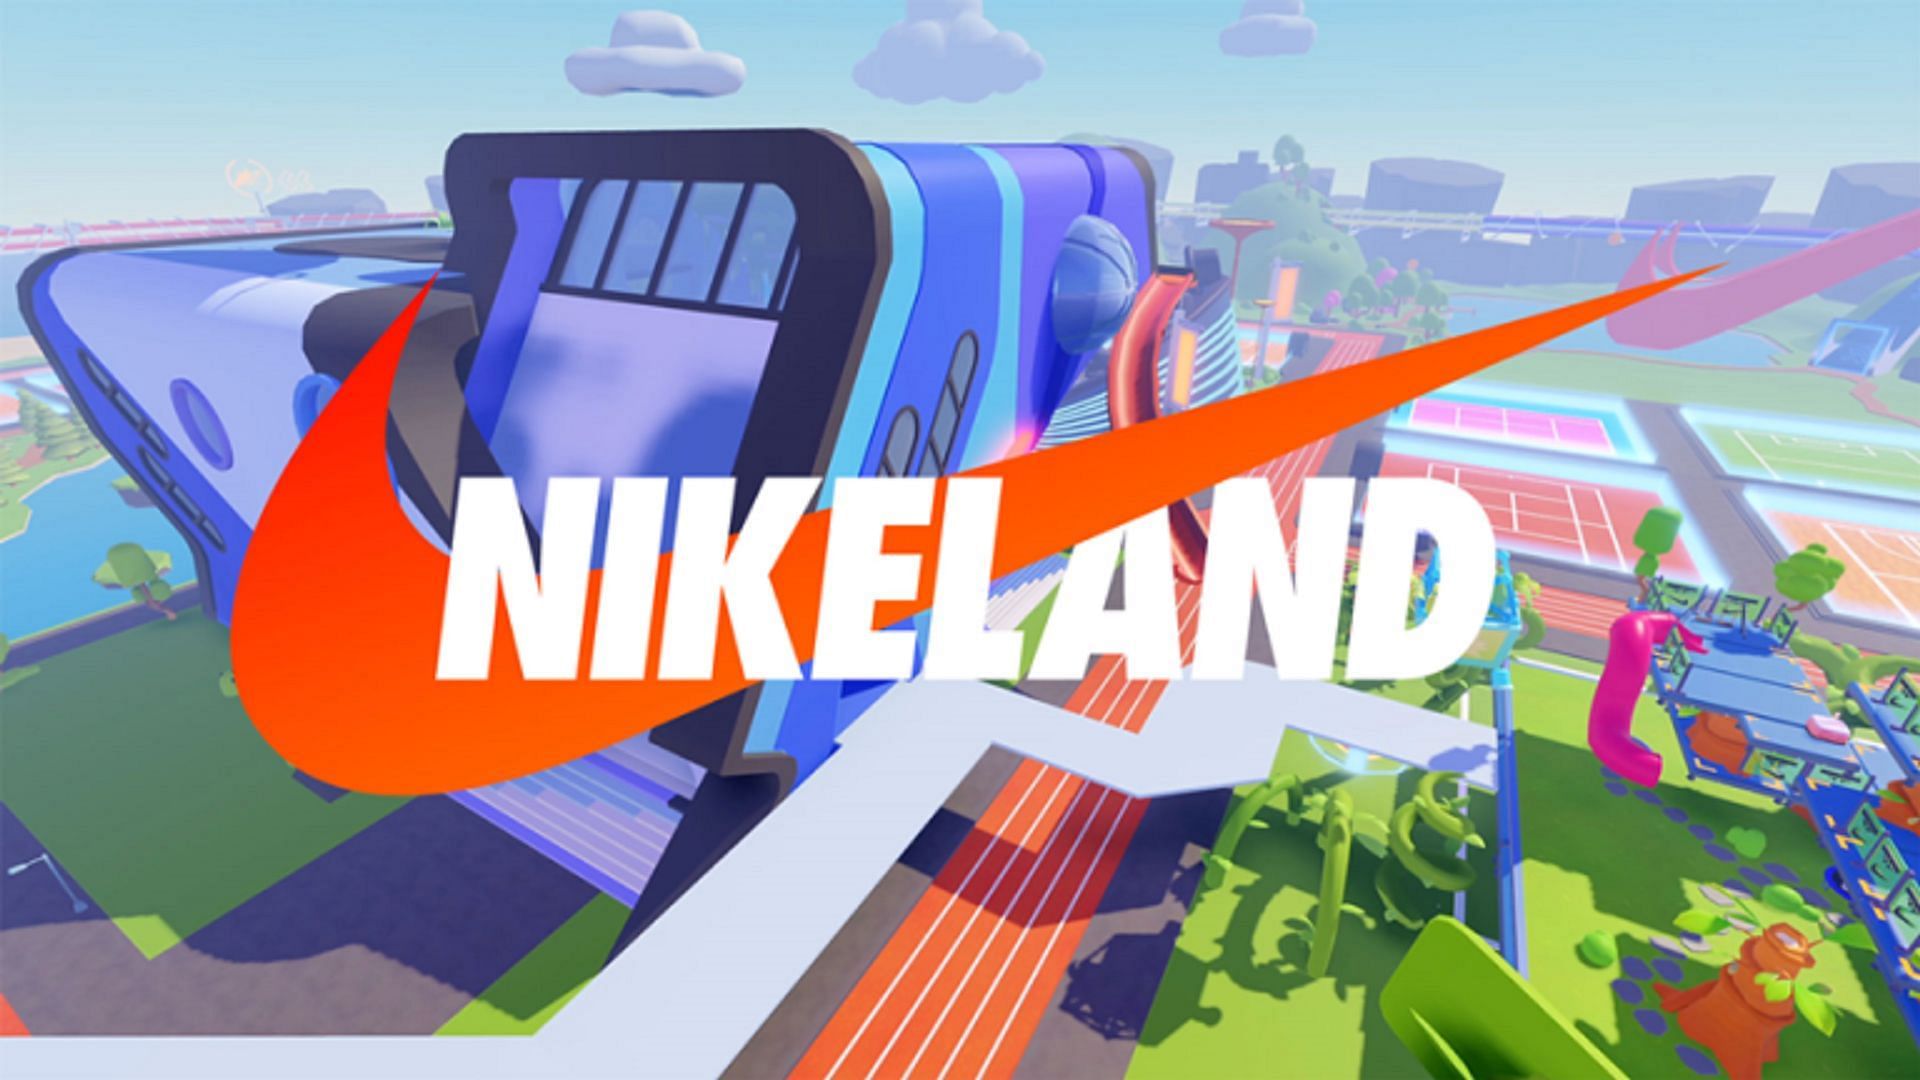 Nikeland is offering players free items for avatars (Image via Roblox)